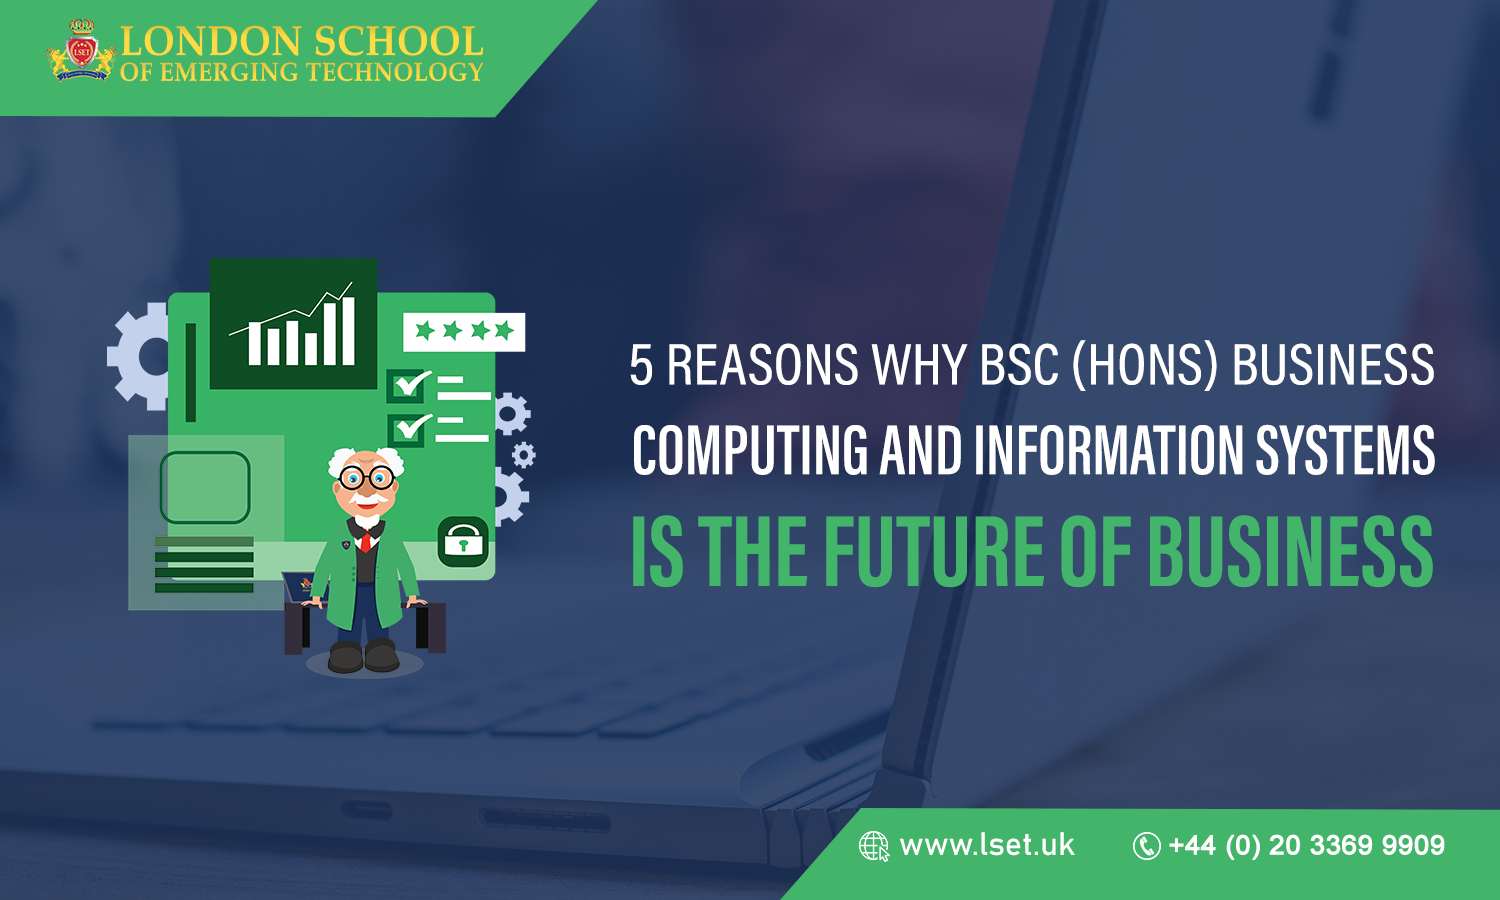 5 Reasons Why BSc (Hons) Business Computing and Information Systems is the Future of Business